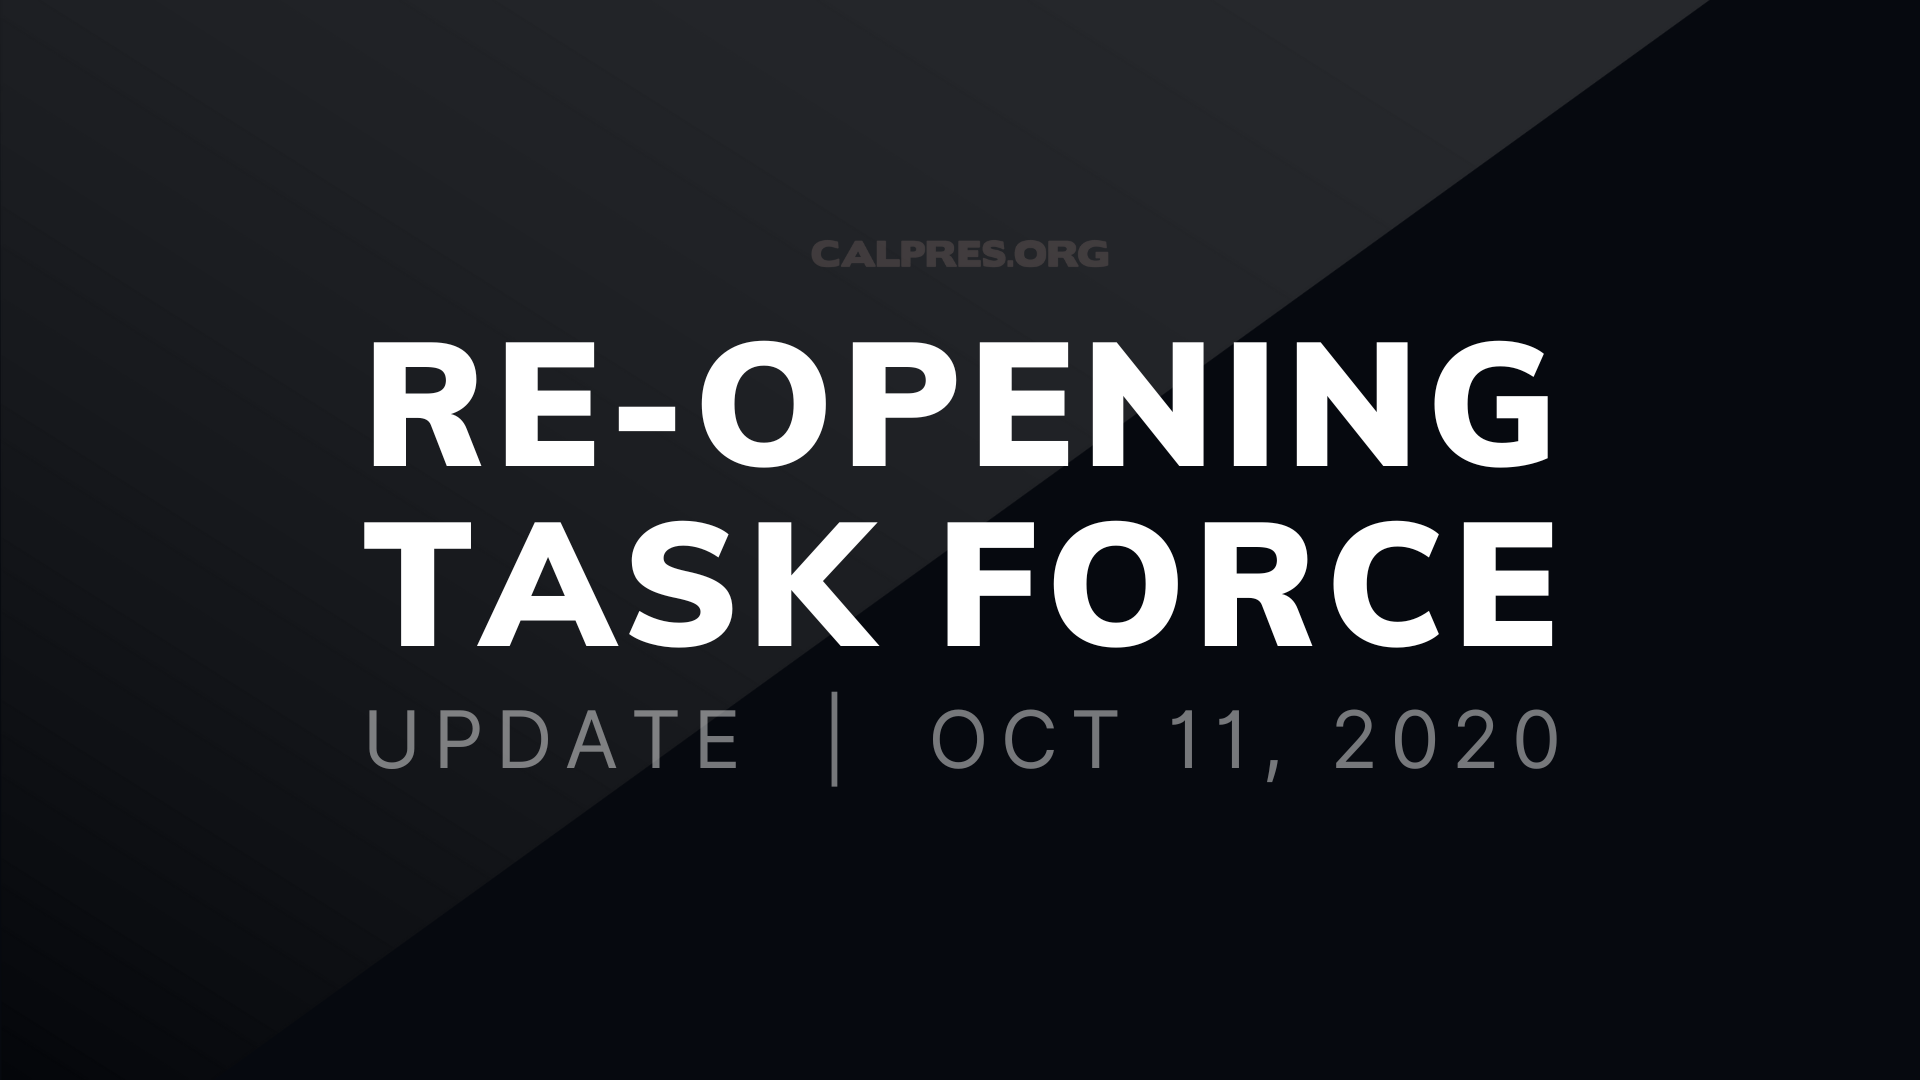 Re-opening Task Force Graphic